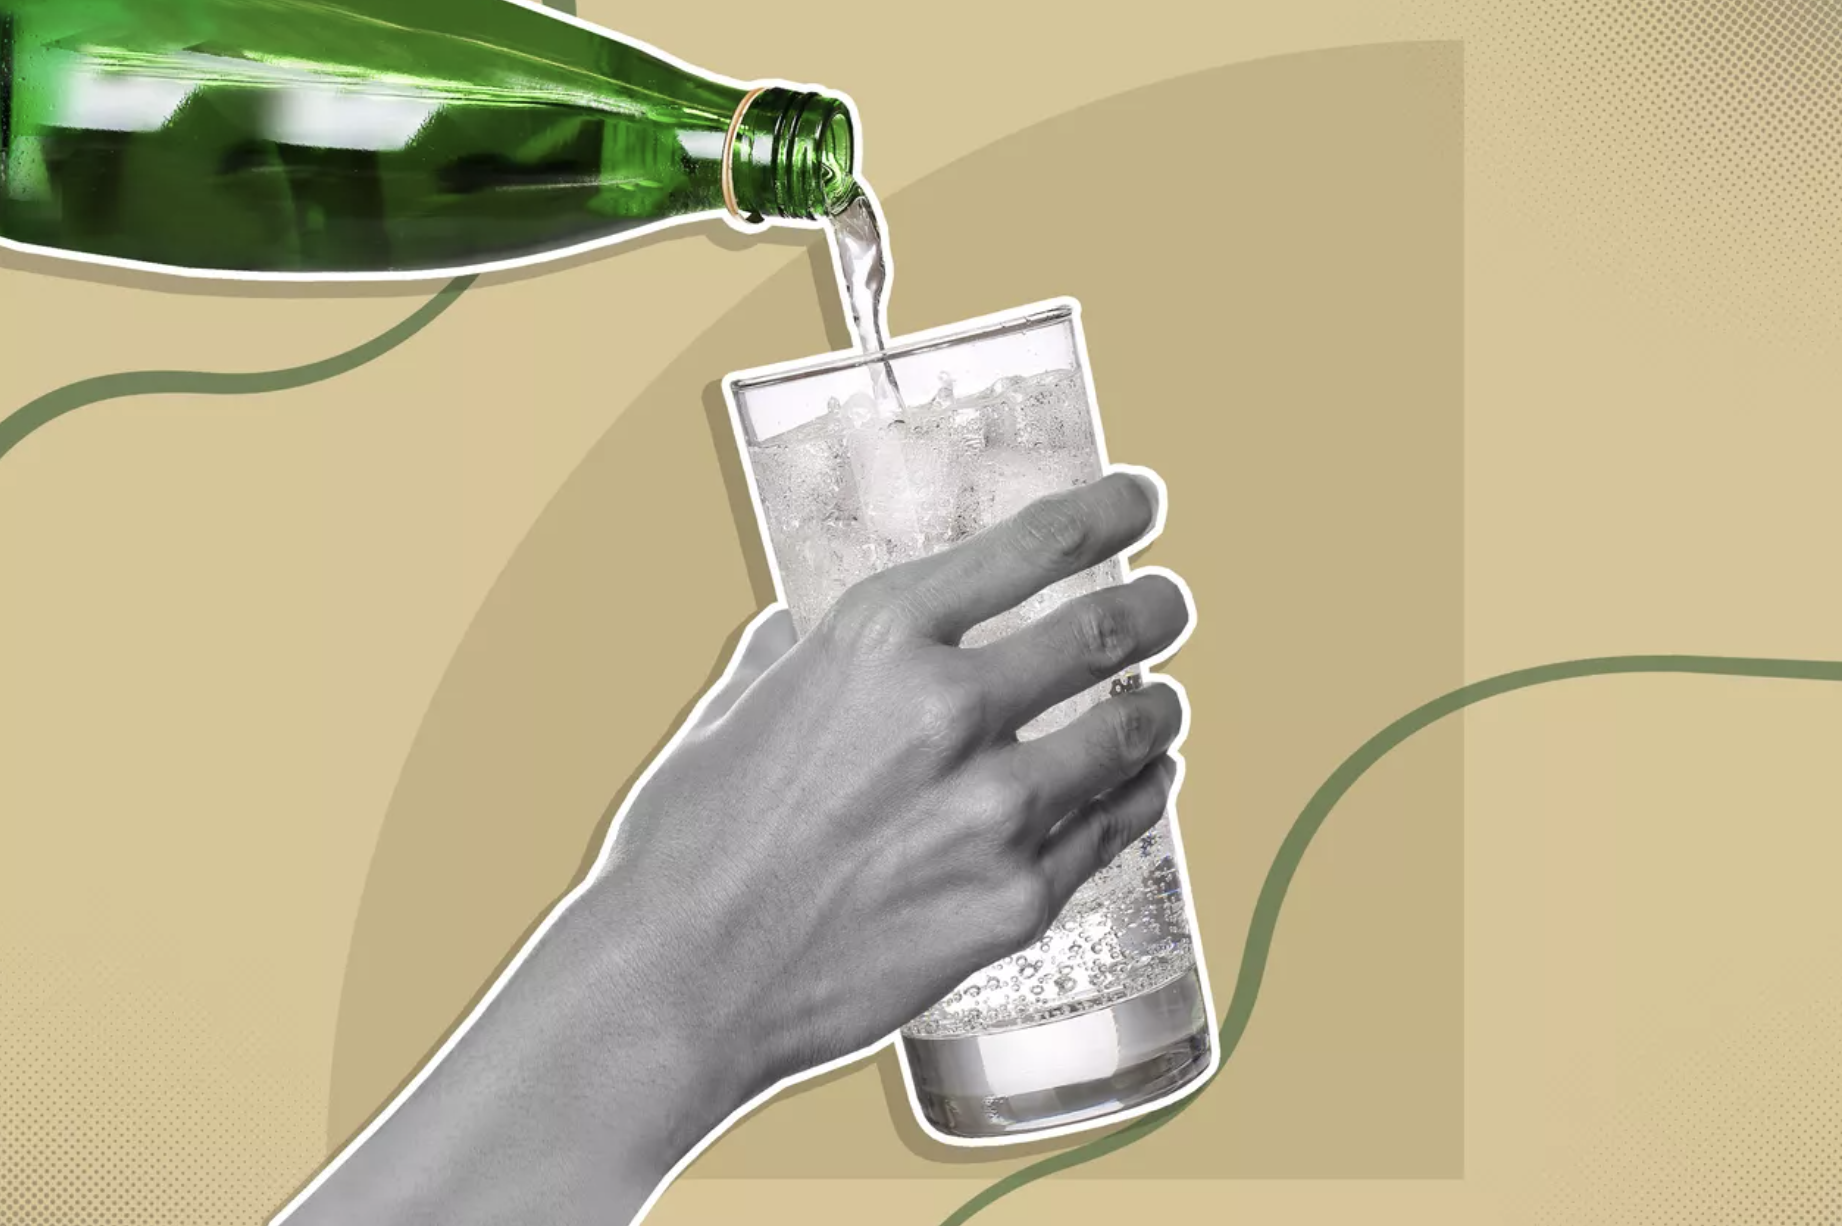 Is sparkling water really bad for you?